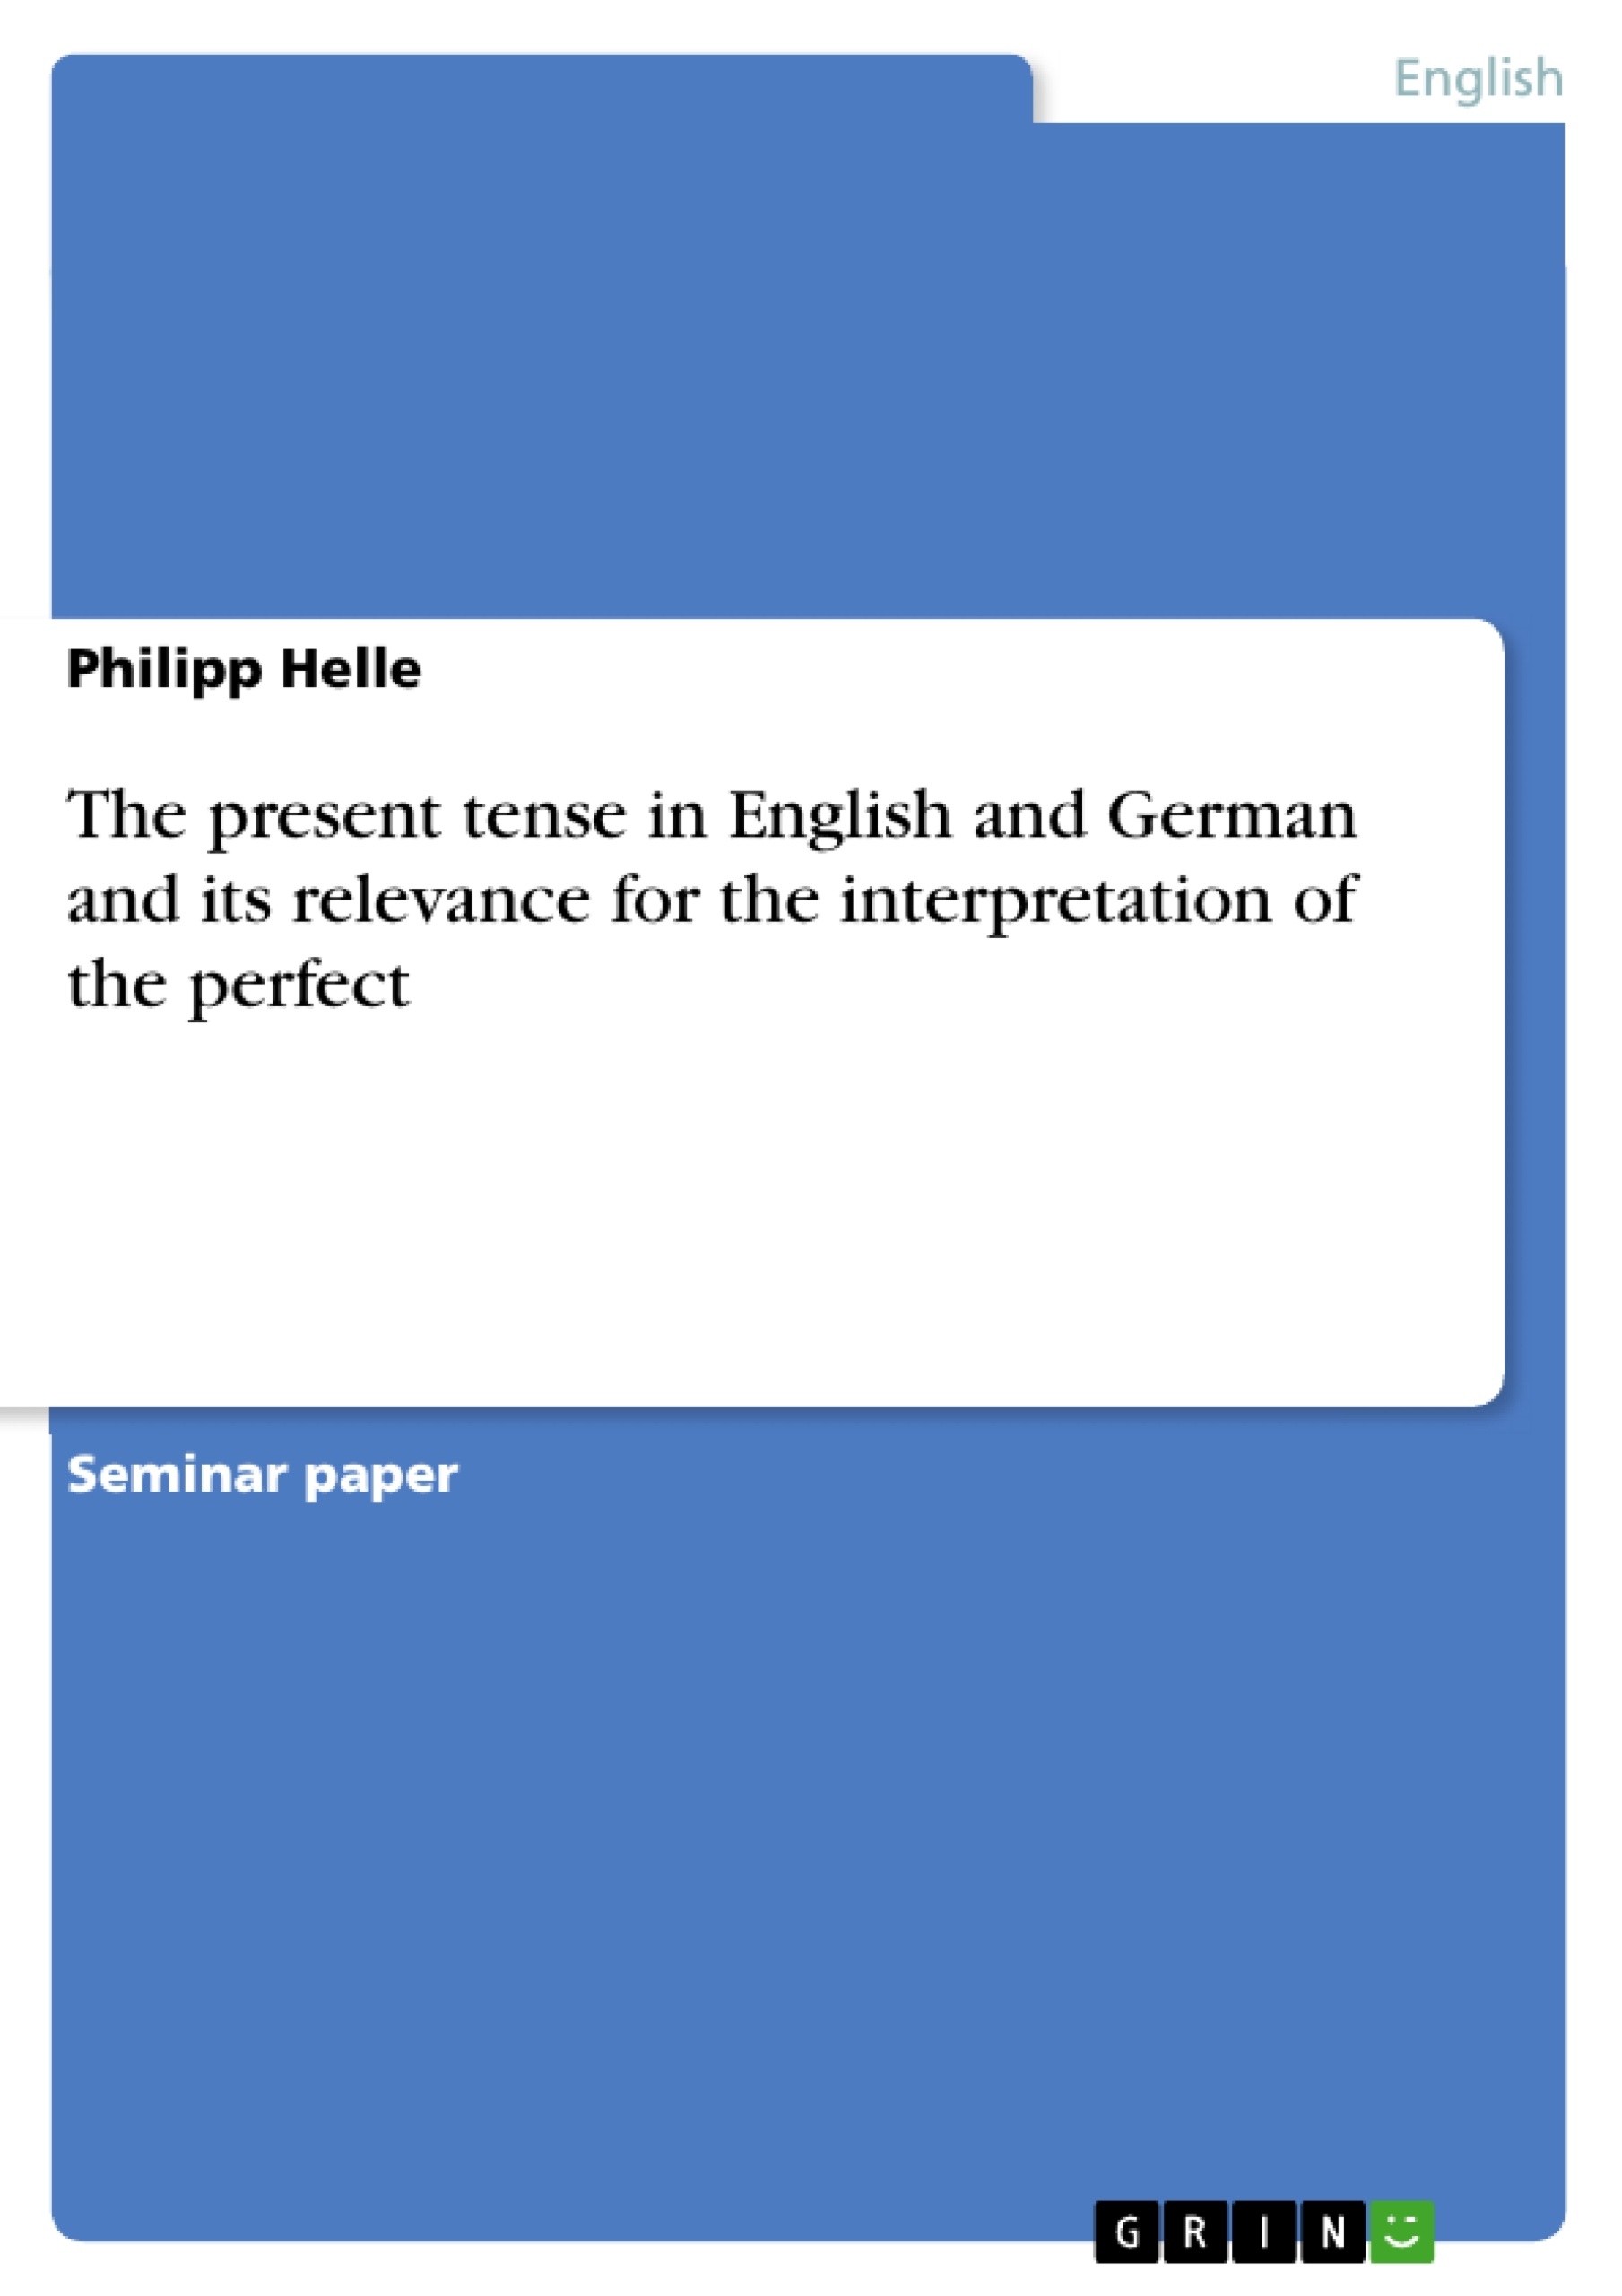 Title: The present tense in English and German and its relevance for the interpretation of the perfect